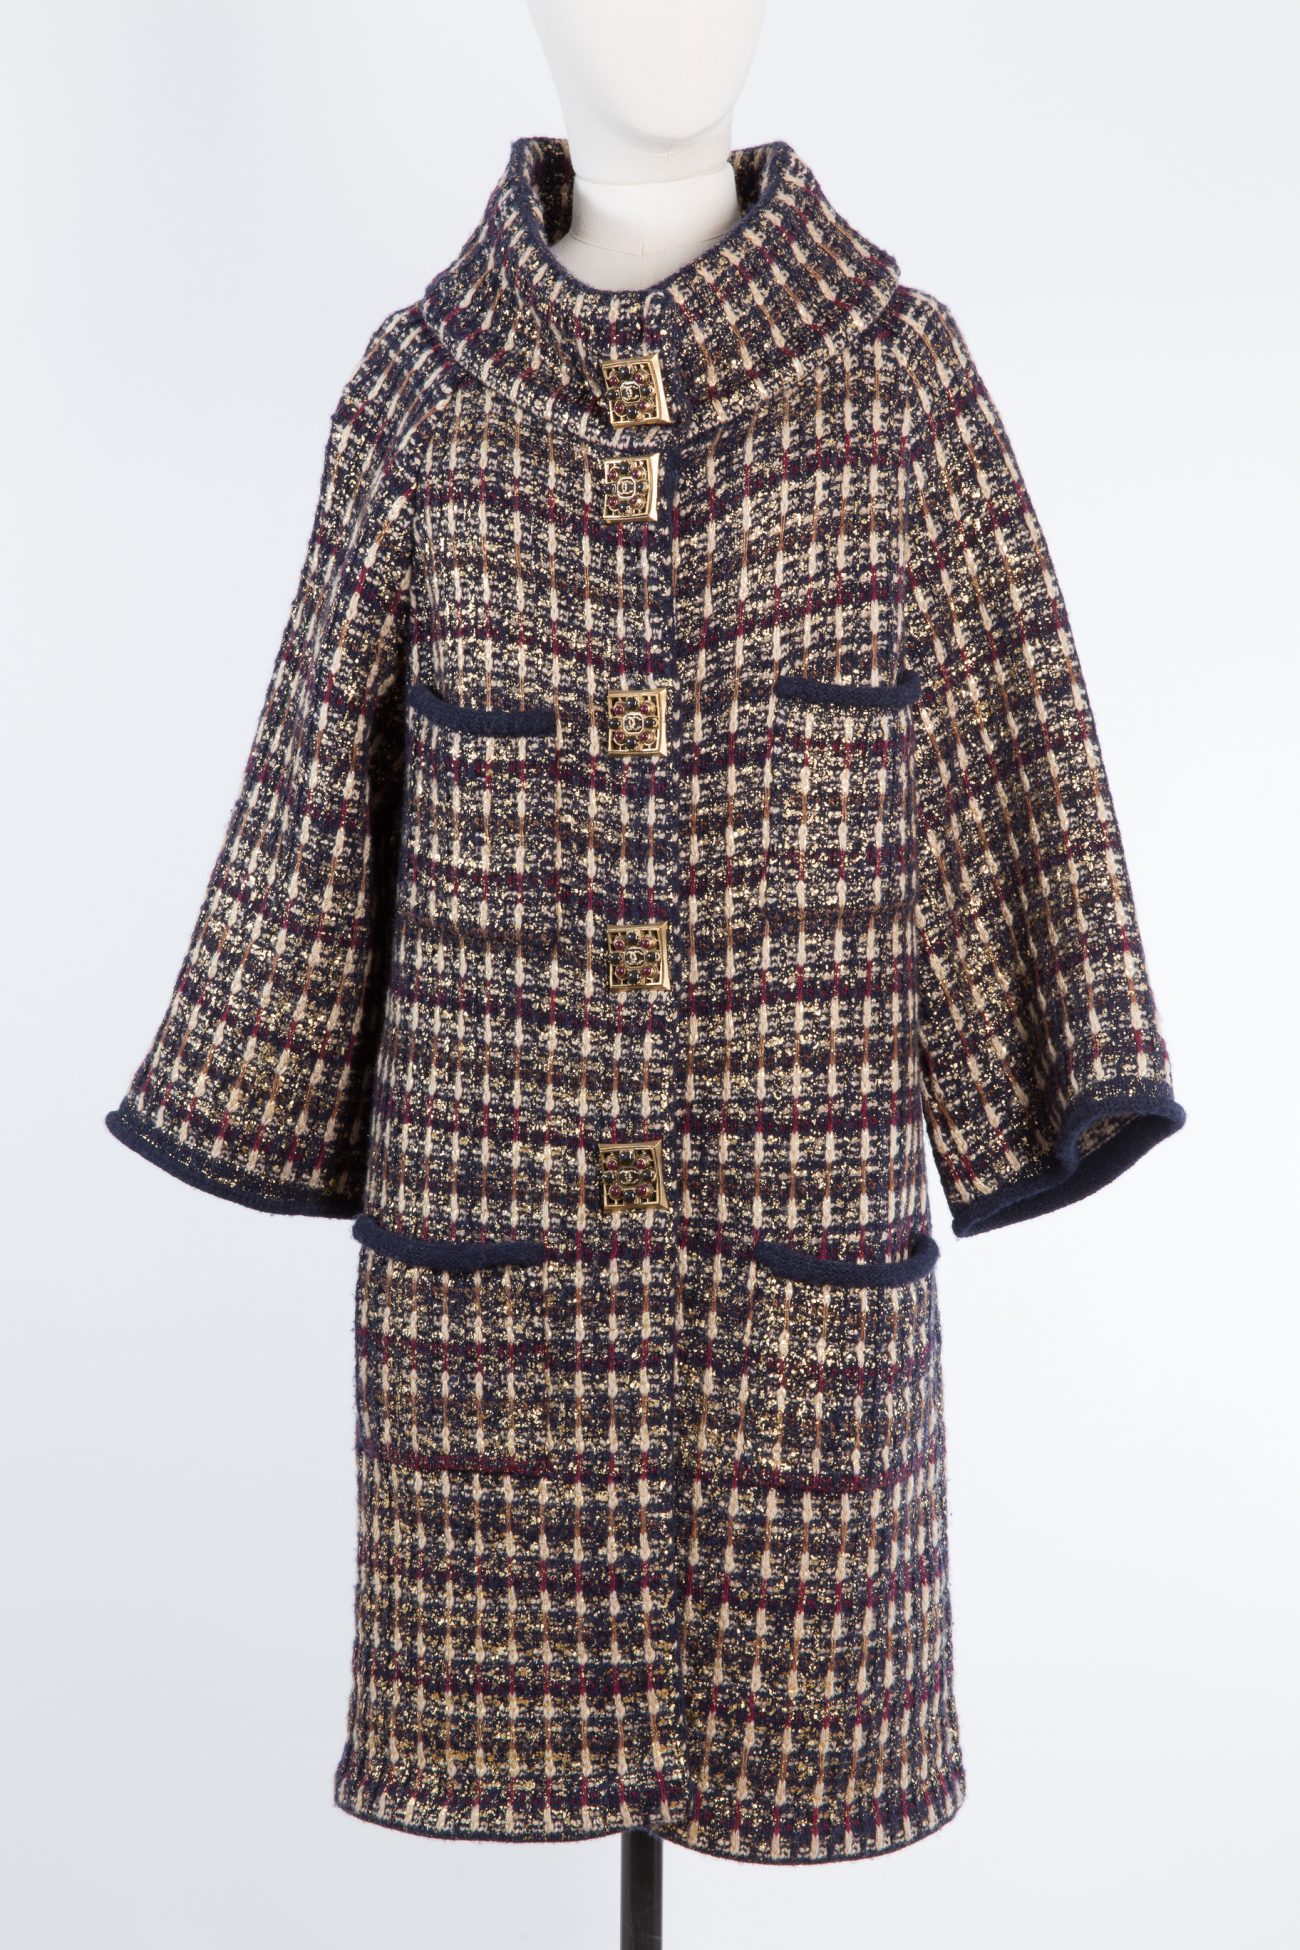 Chanel cashmere cardigan from Paris-Byzance collection